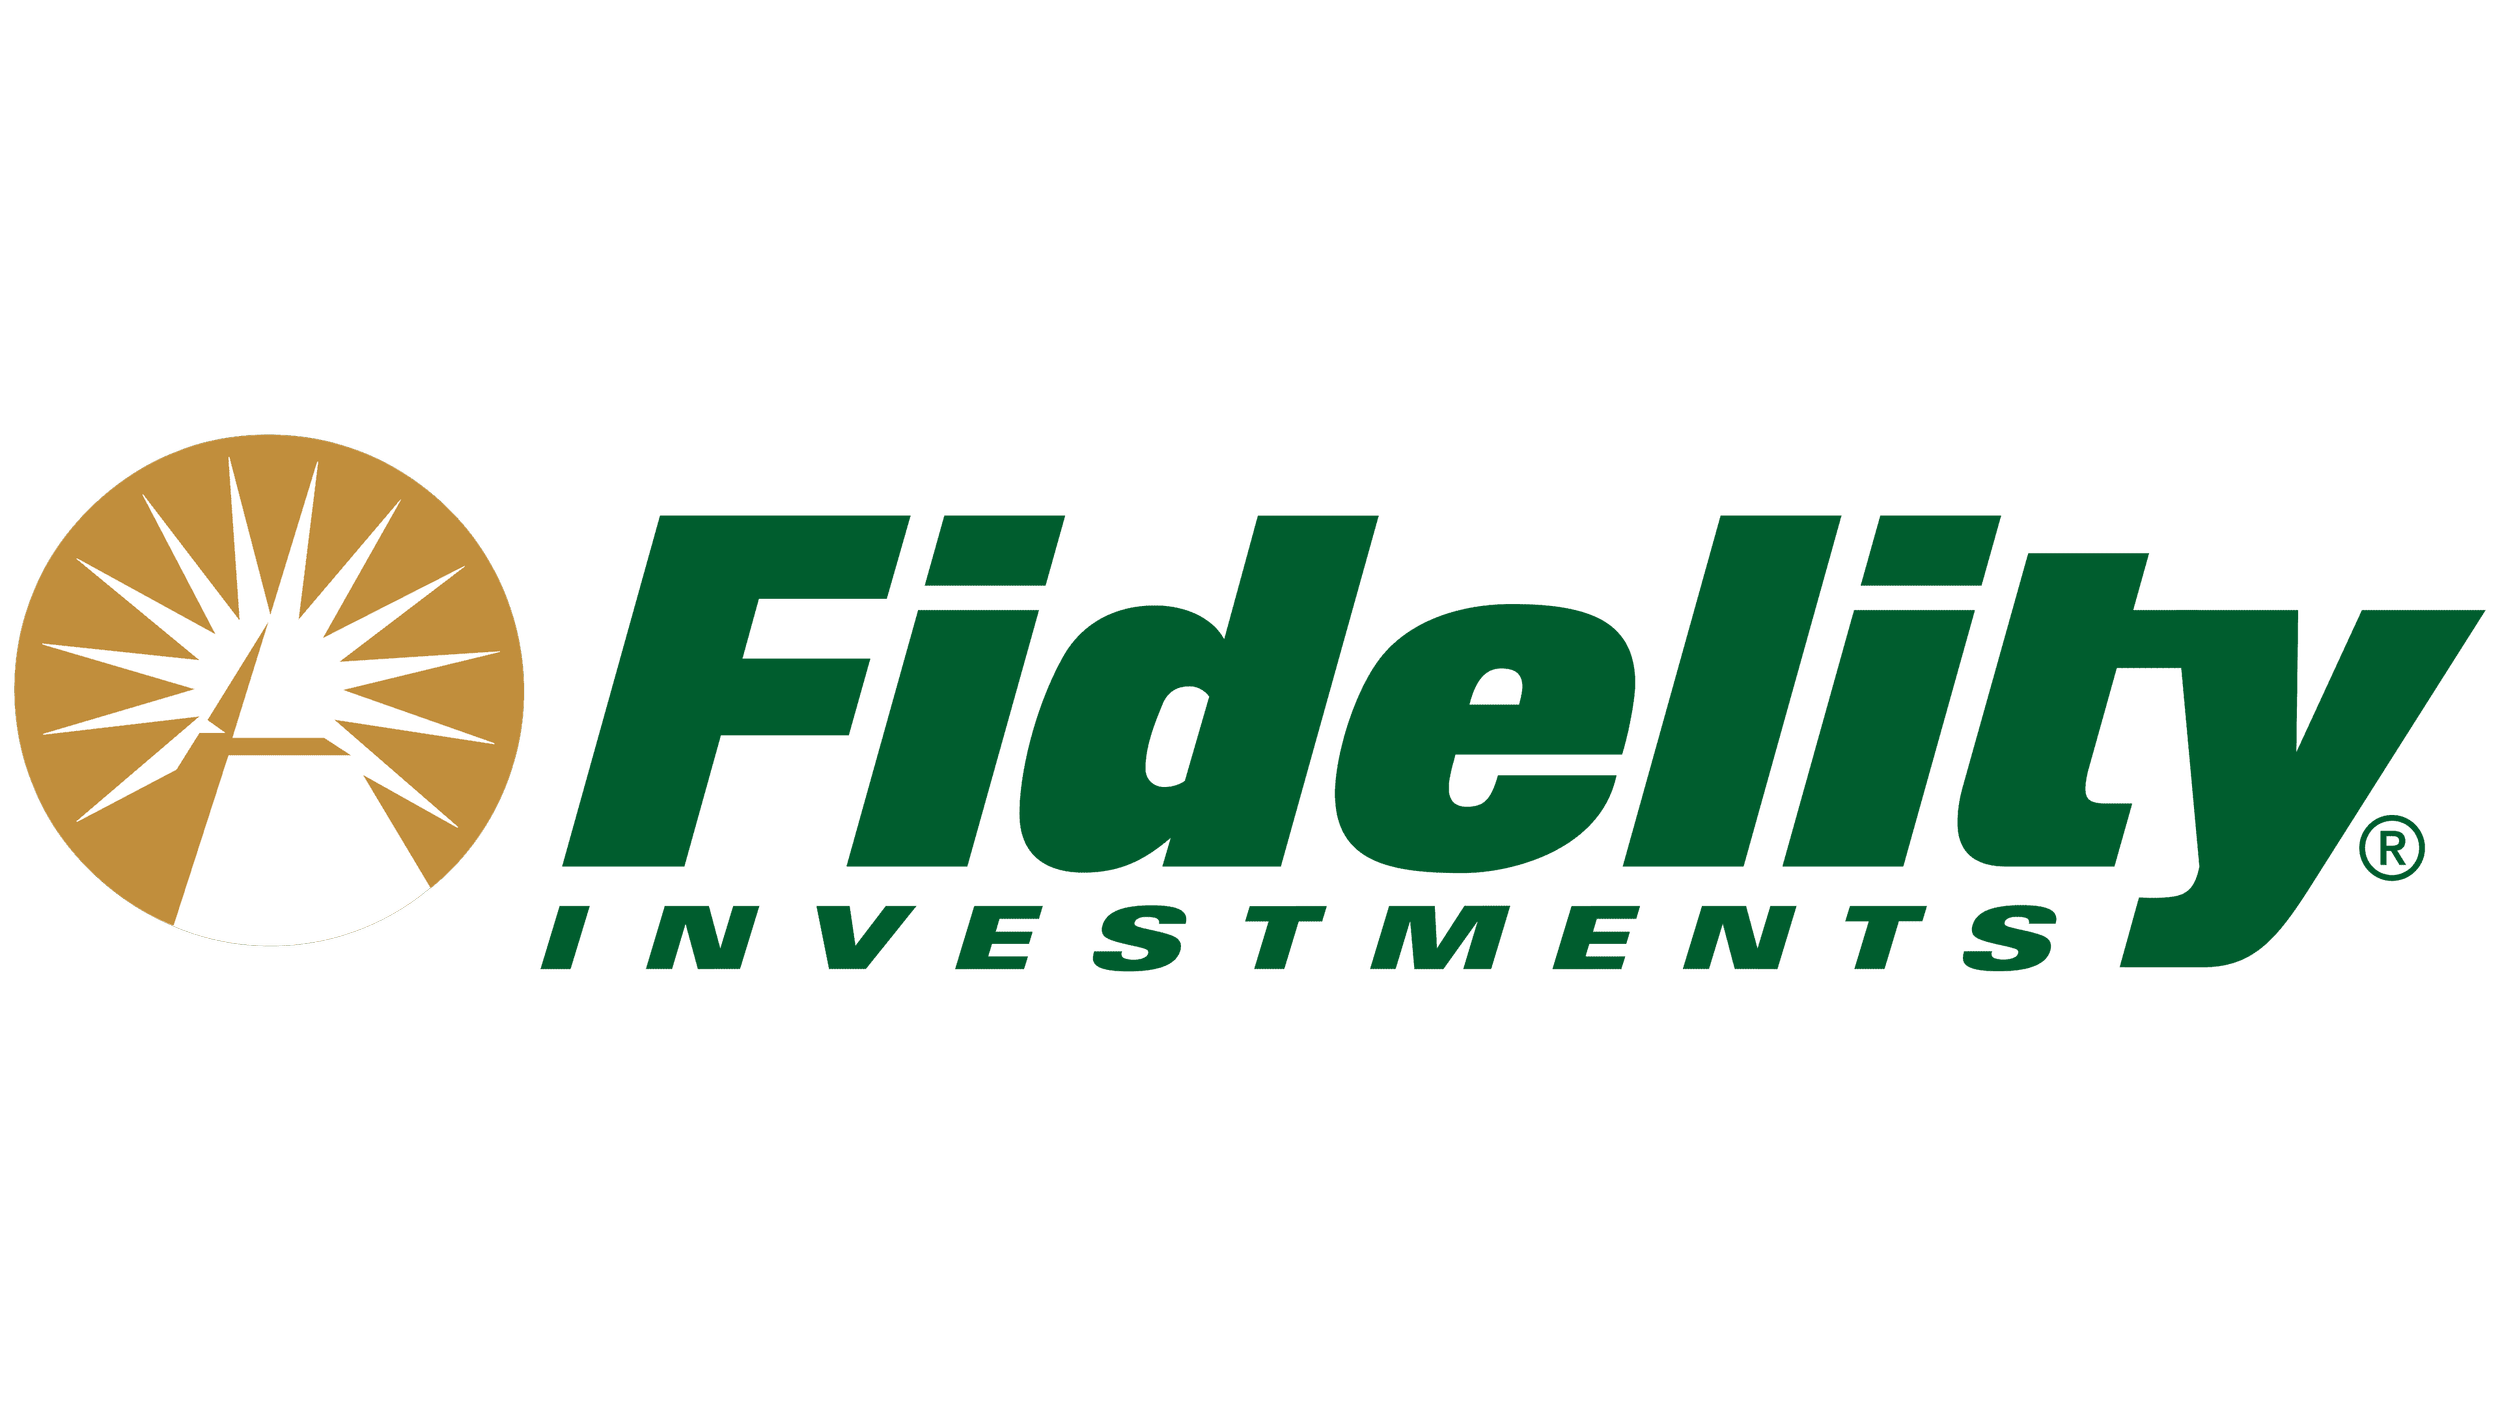  Click to login to Fidelity. 